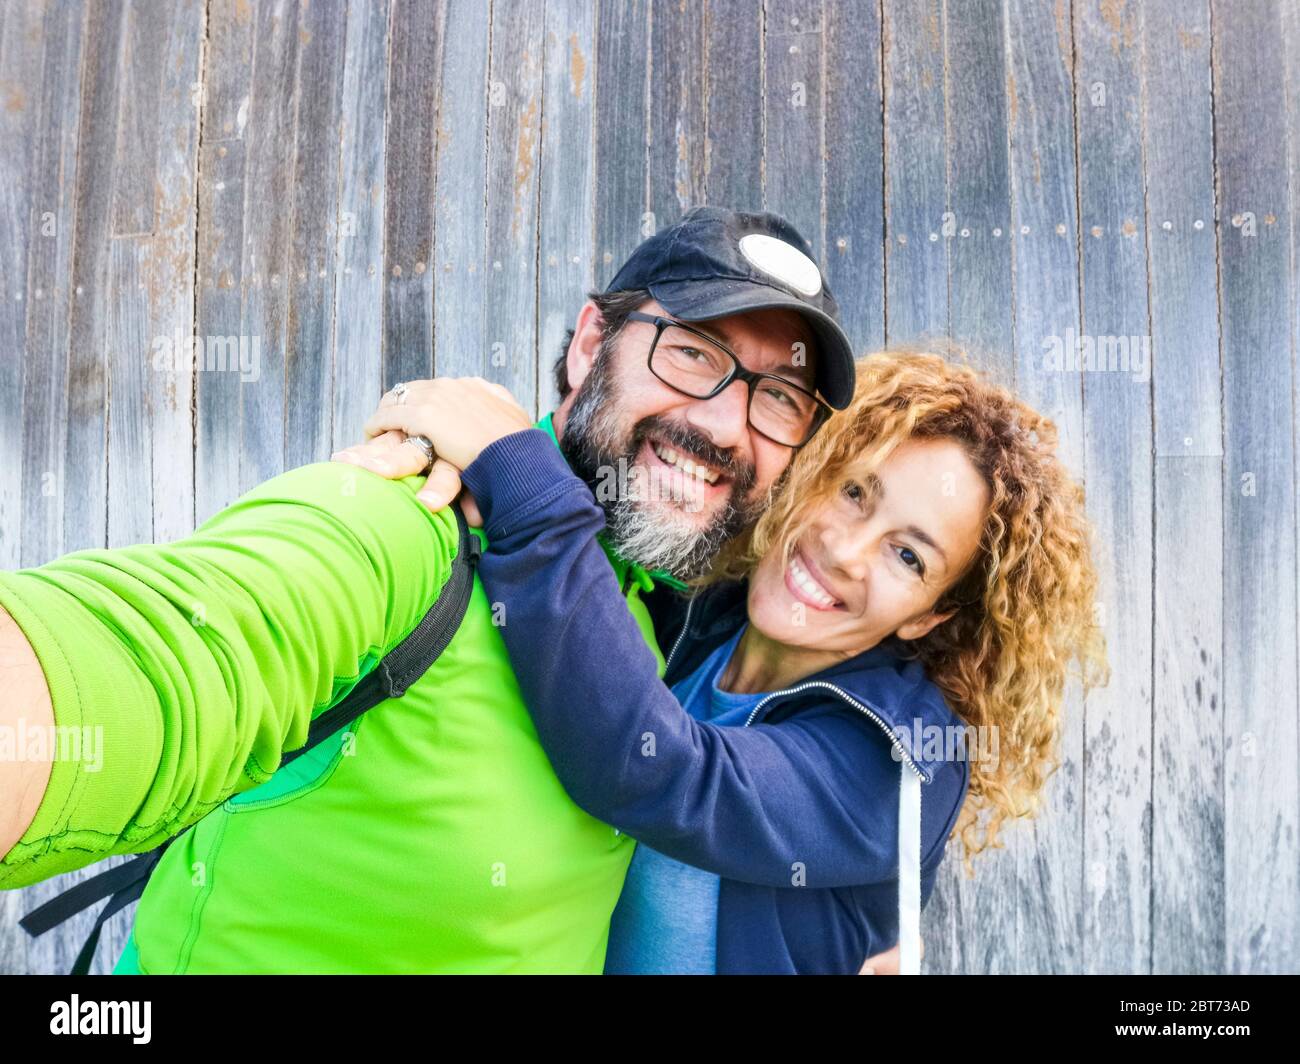 Happy caucasian adult couple in outdoor leisure  activity together taking selfie picture - concept of life and relationship Stock Photo